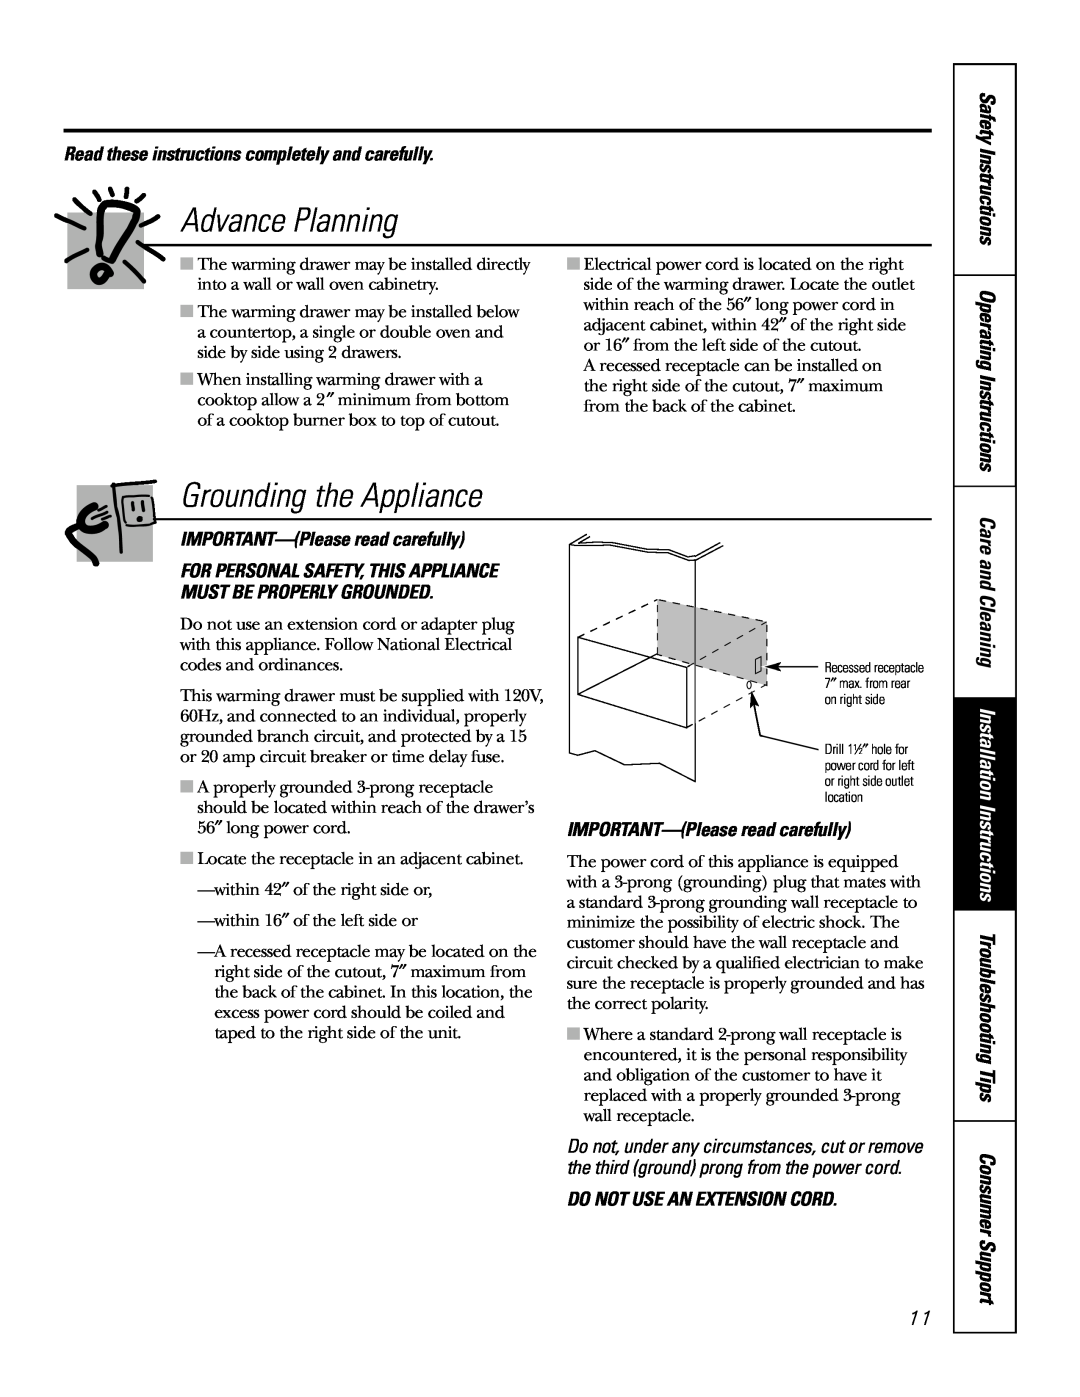 GE JTD915 Advance Planning, Grounding the Appliance, IMPORTANT-Please read carefully, Do Not Use An Extension Cord 